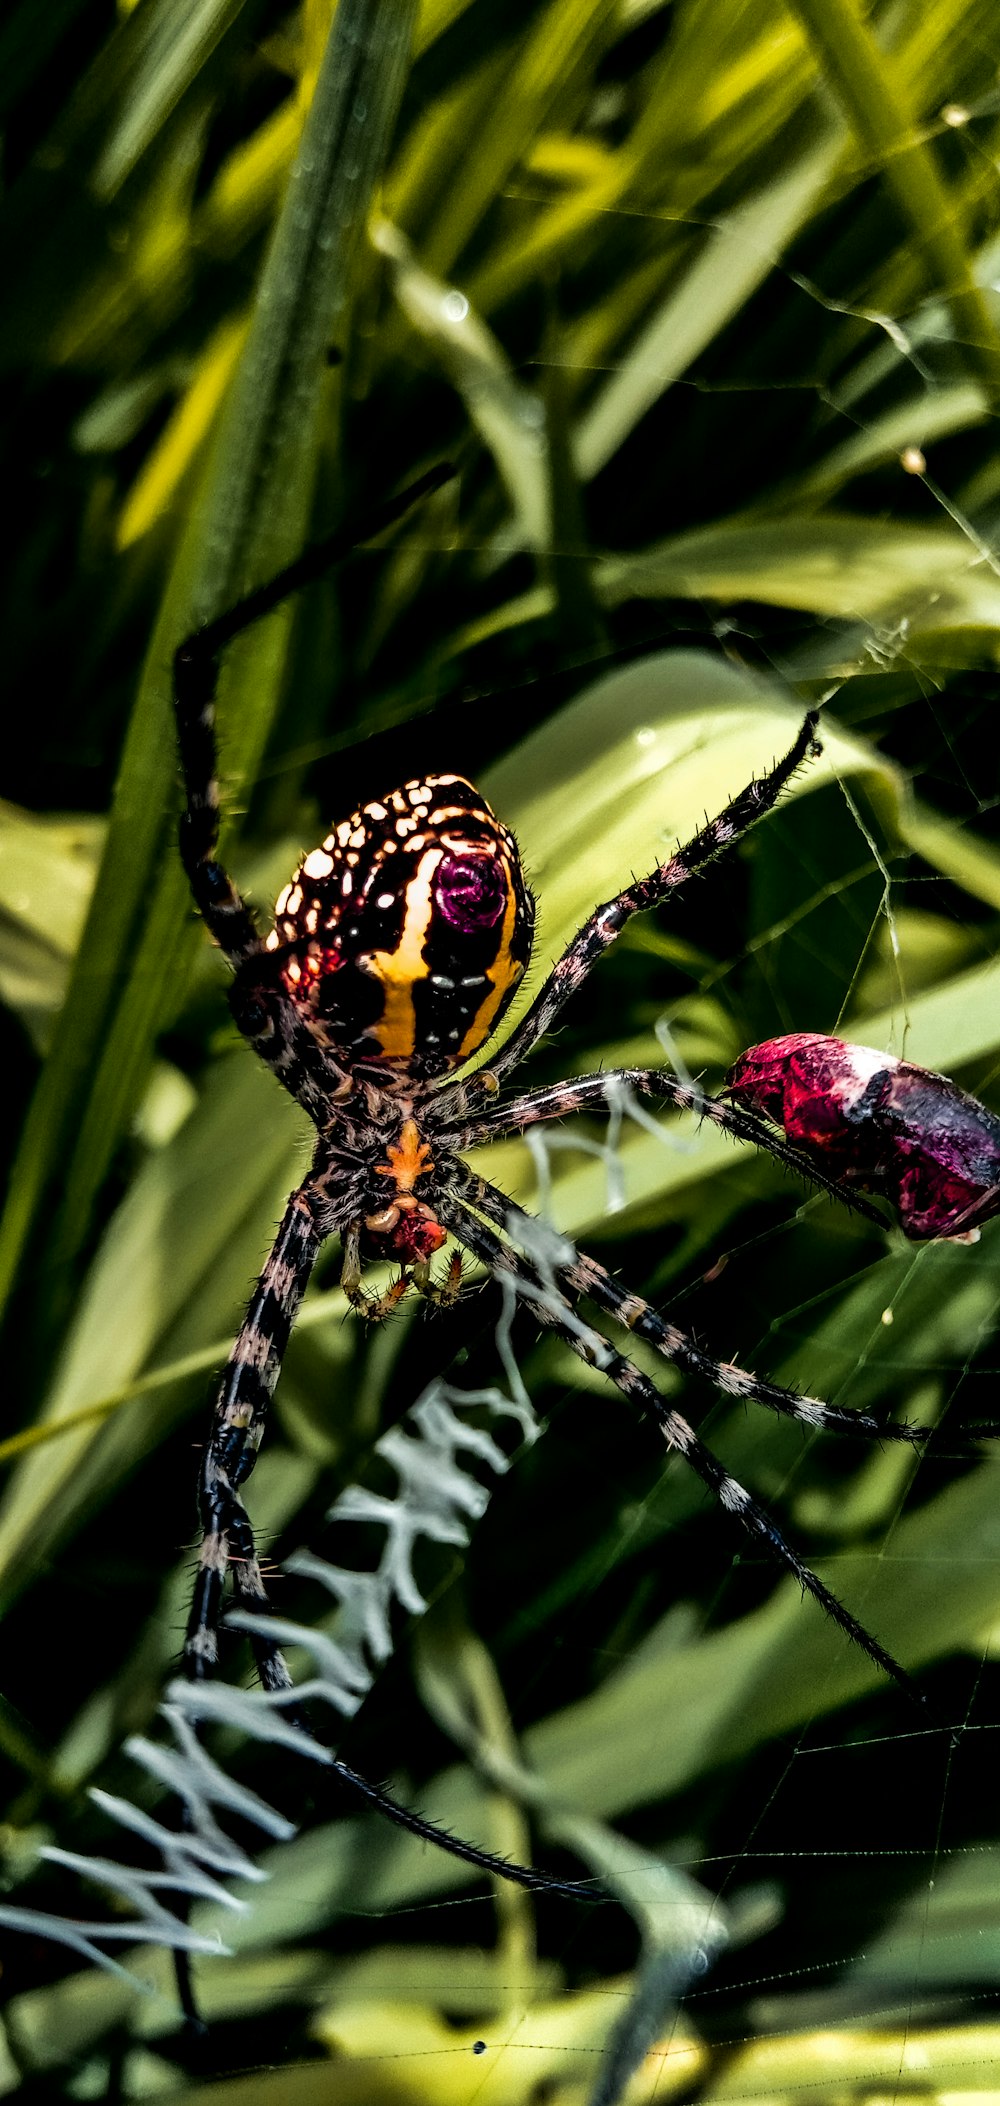 a close up of a spider on a plant